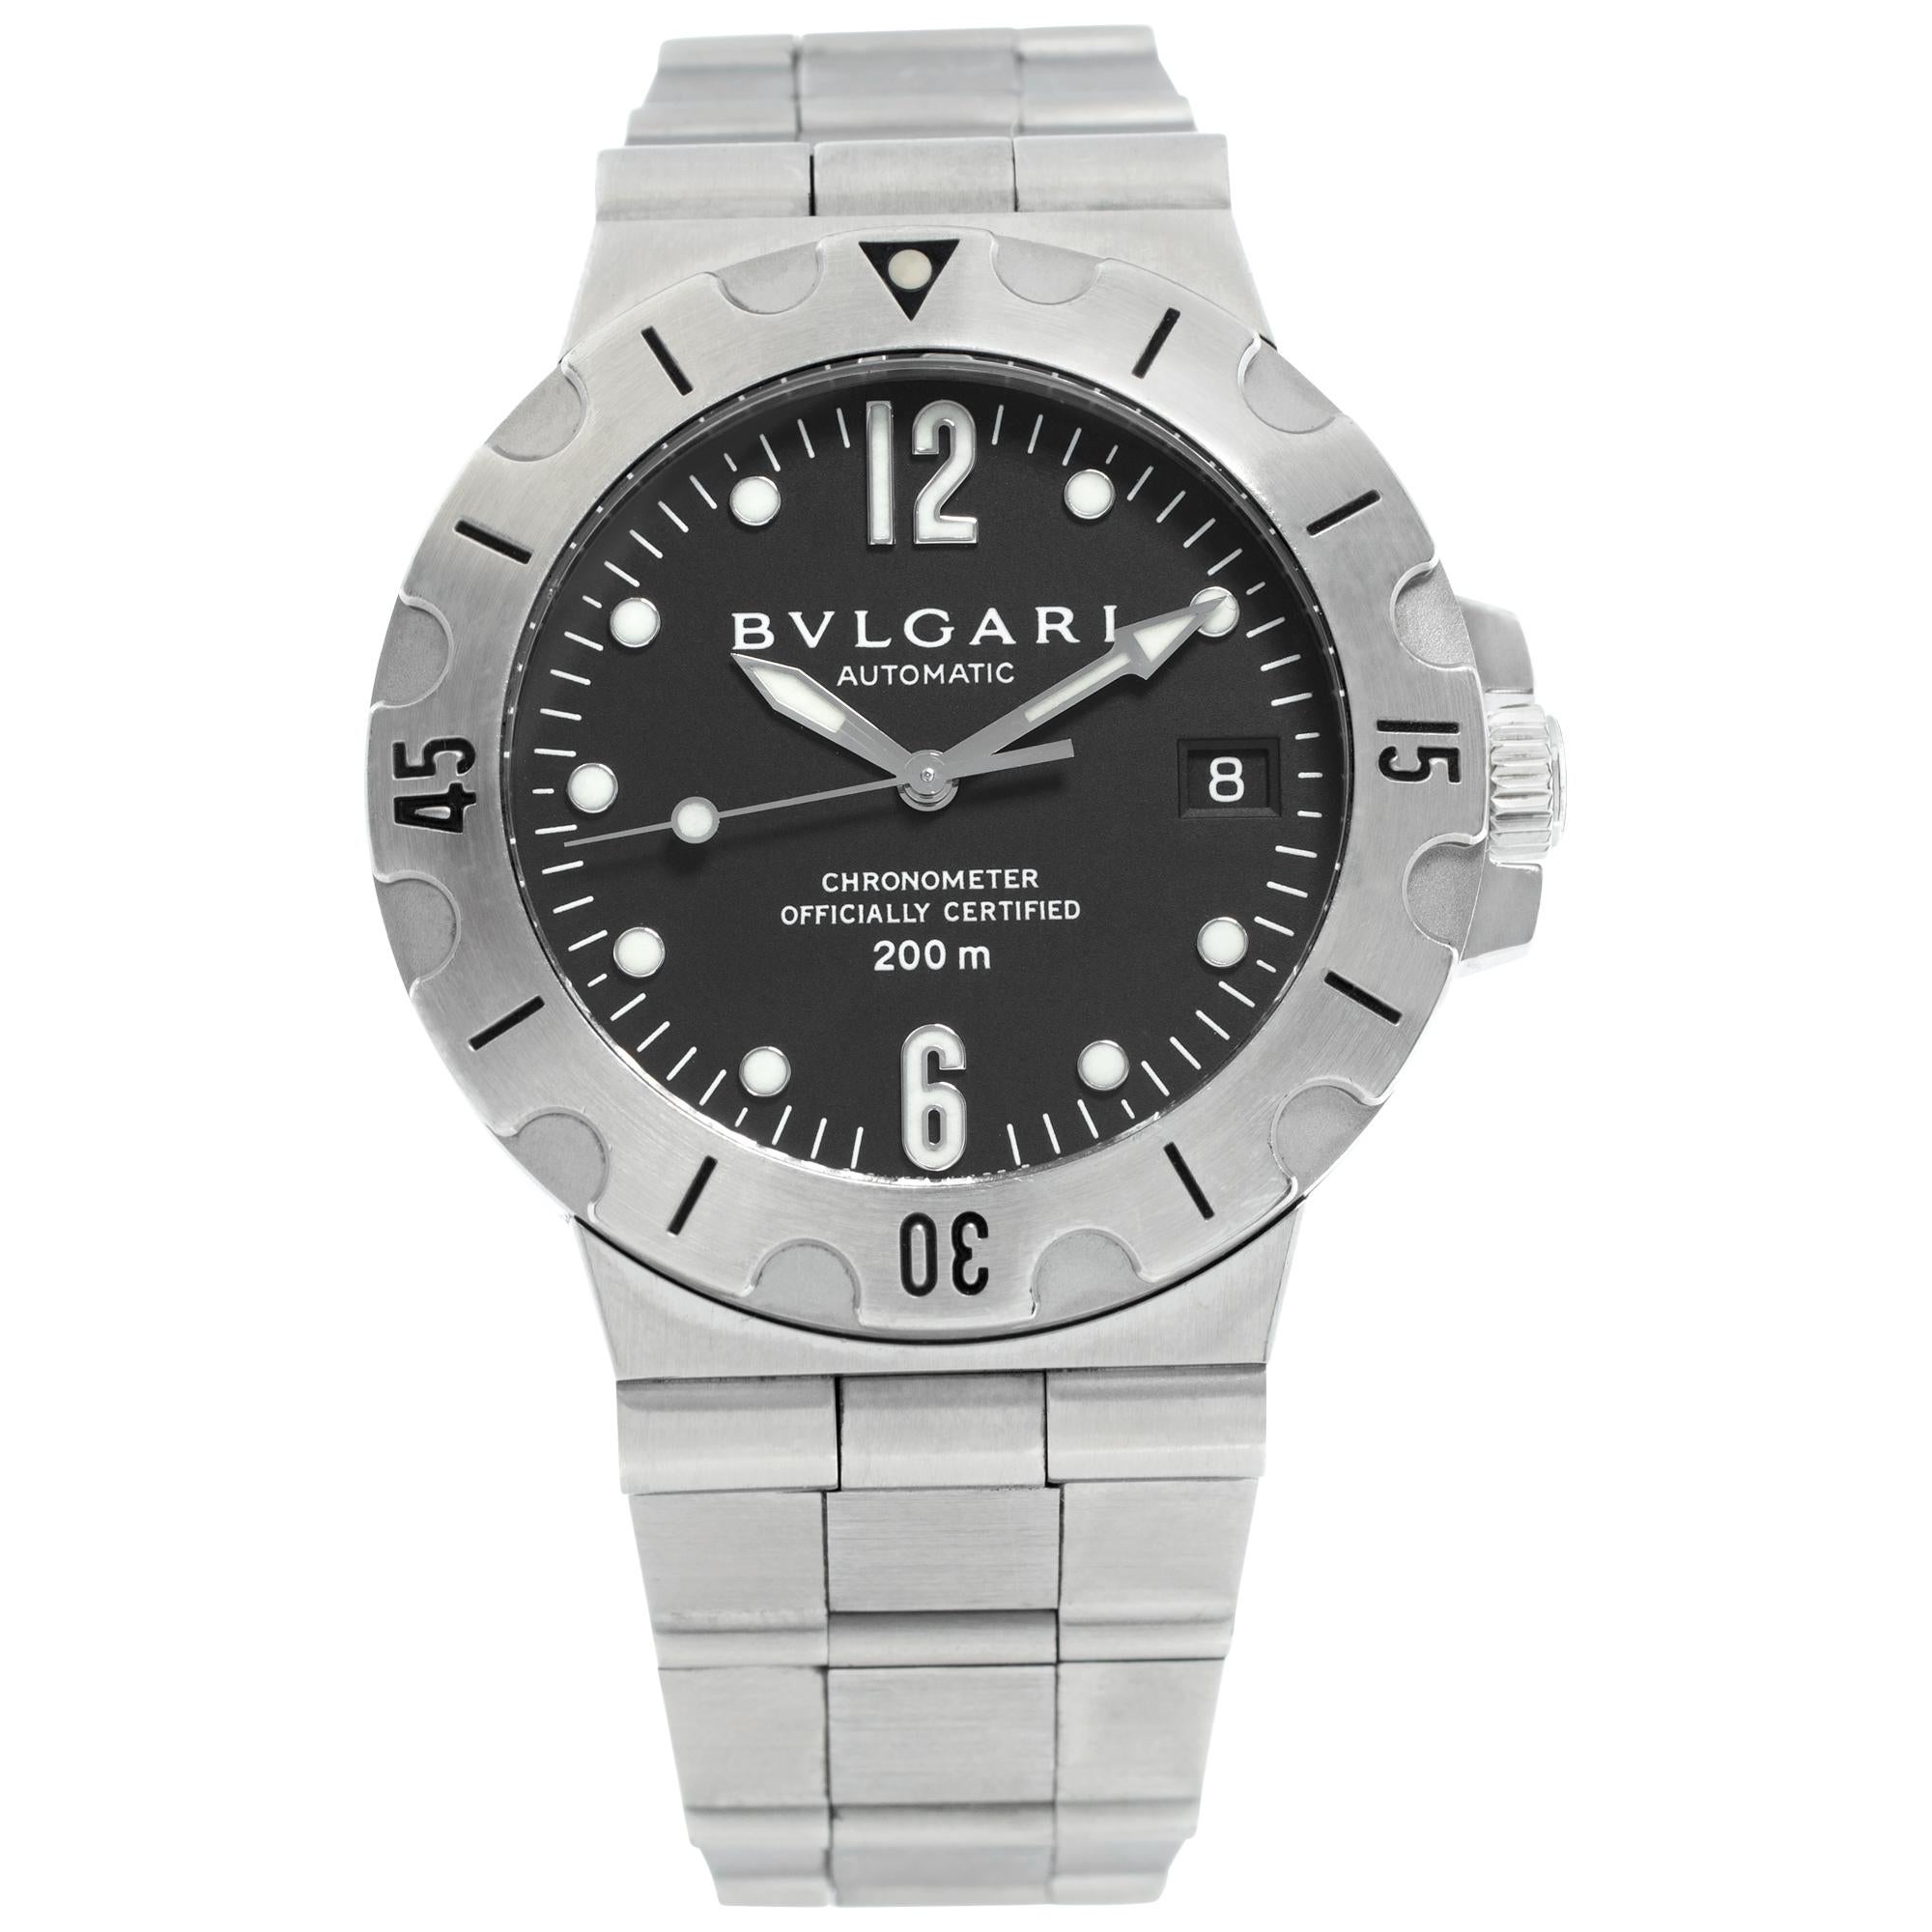 Bvlgari Diagono sd38s in Stainless Steel with a black dial 38mm Automatic watch